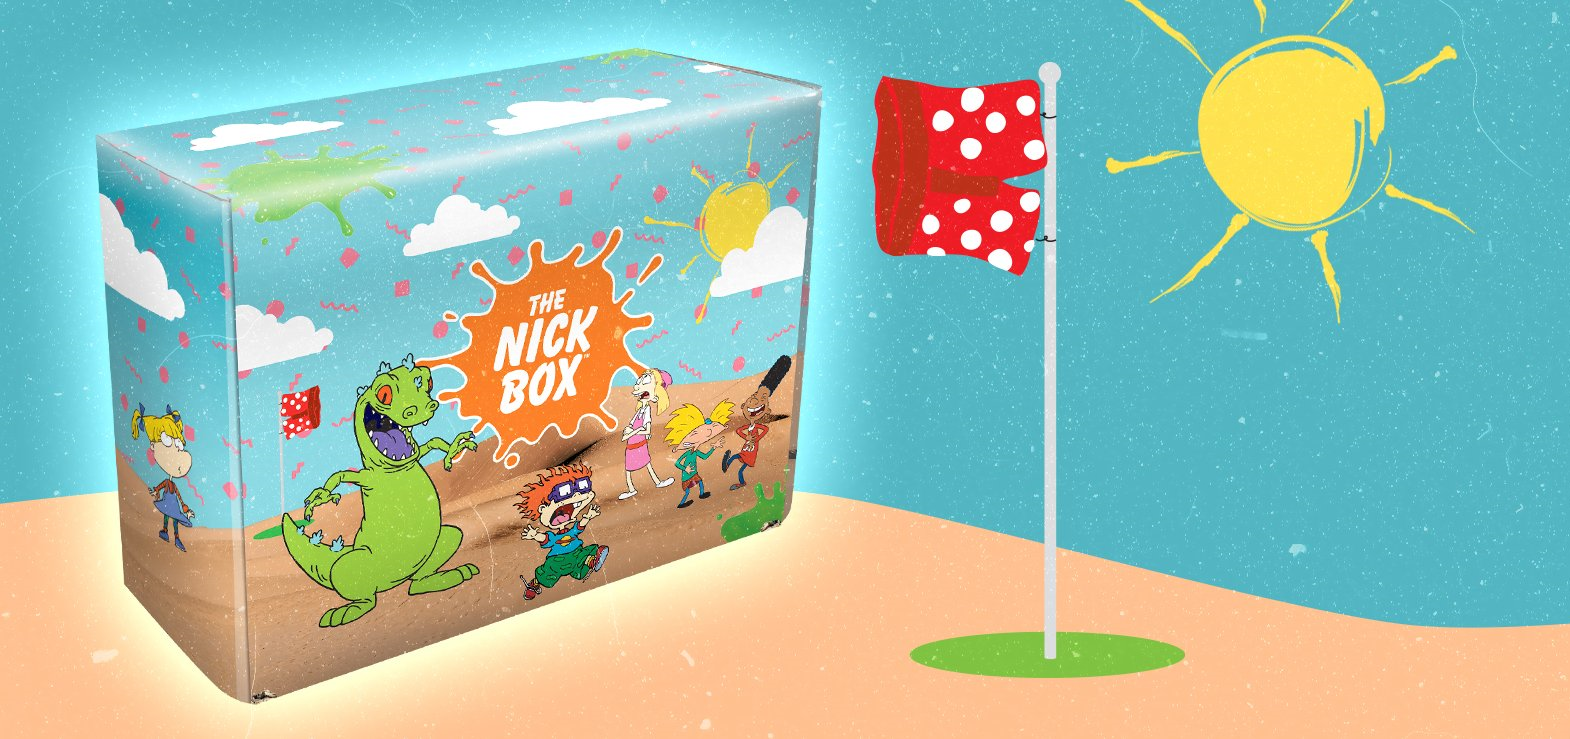 NickALive! The Nick Box to Celebrate 20th Box This Summer